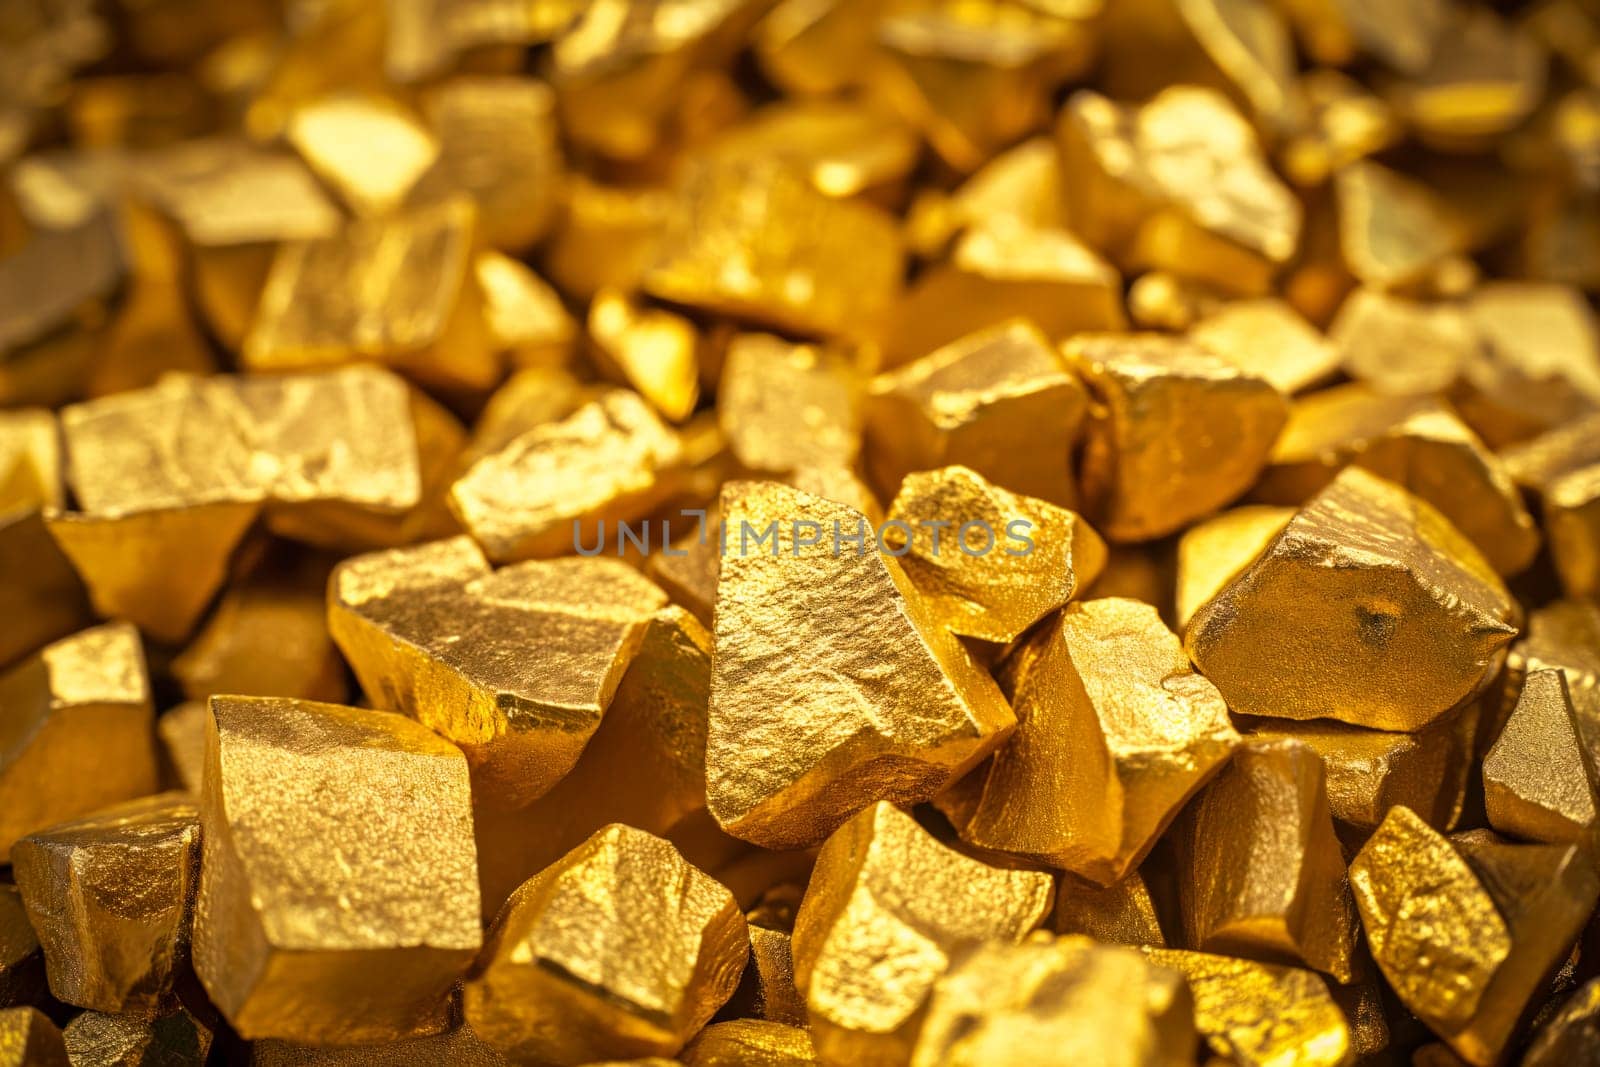 Golden Nuggets Close-Up by dimol